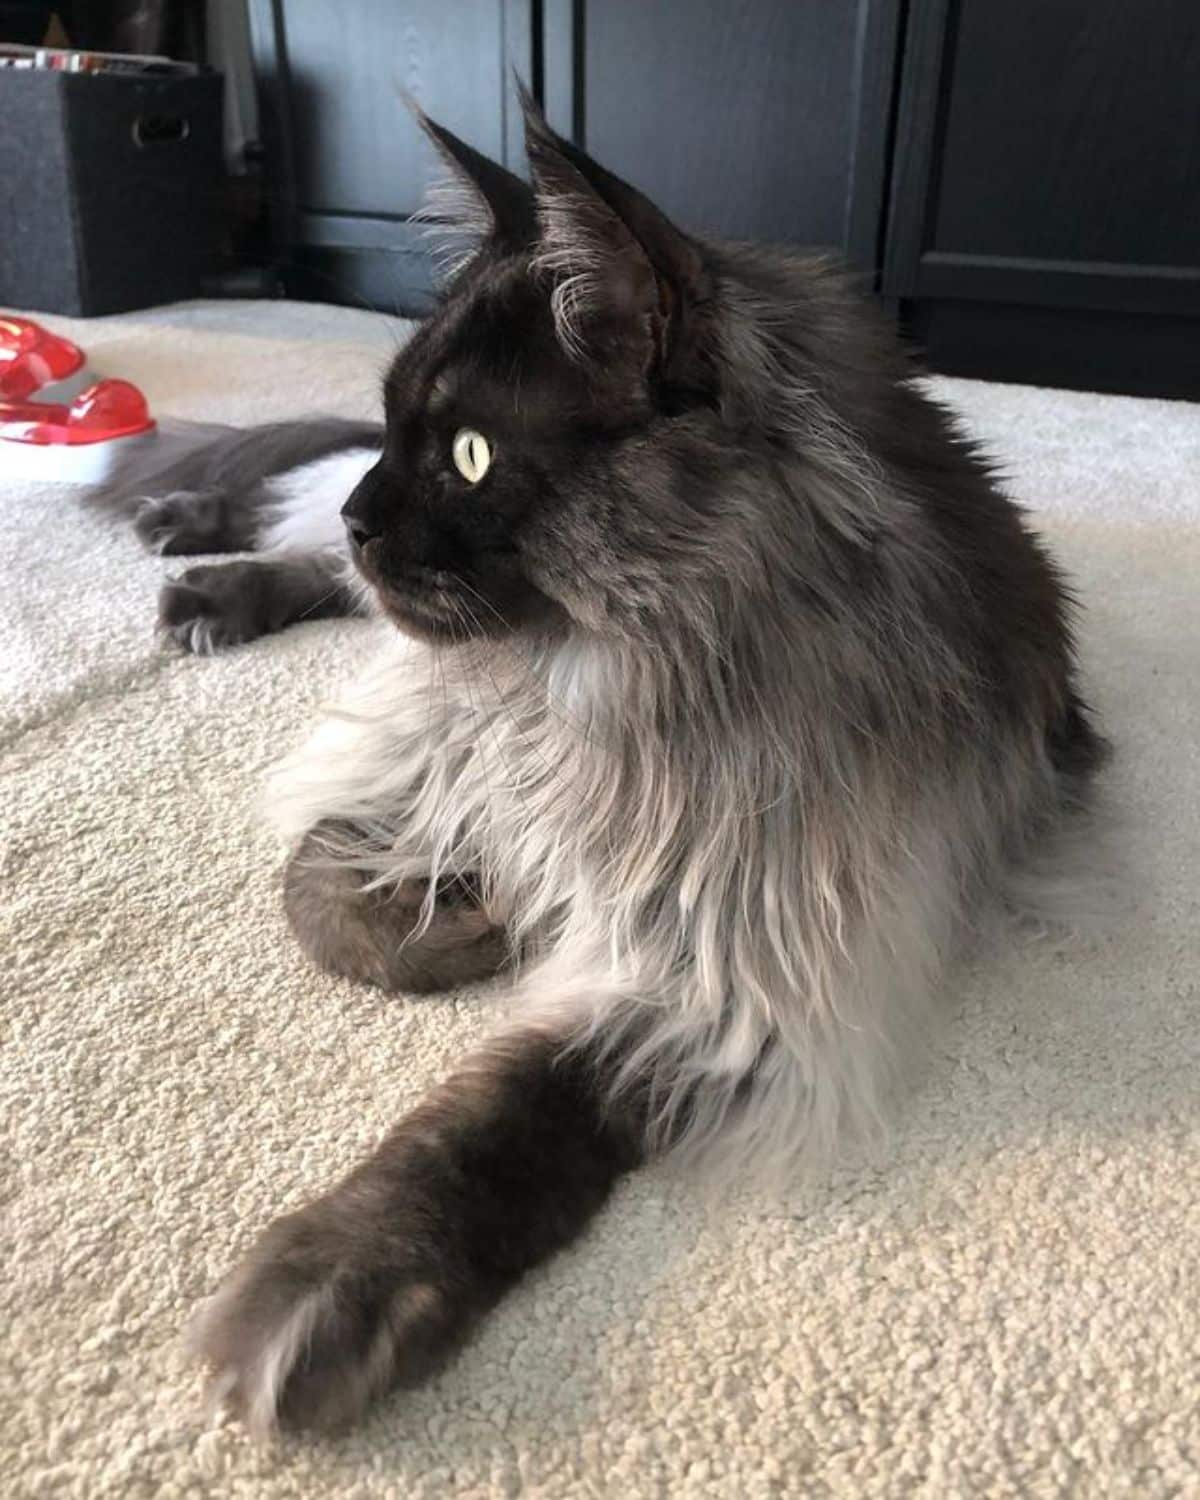 A fluffy gray maine coon lying on a carpet.